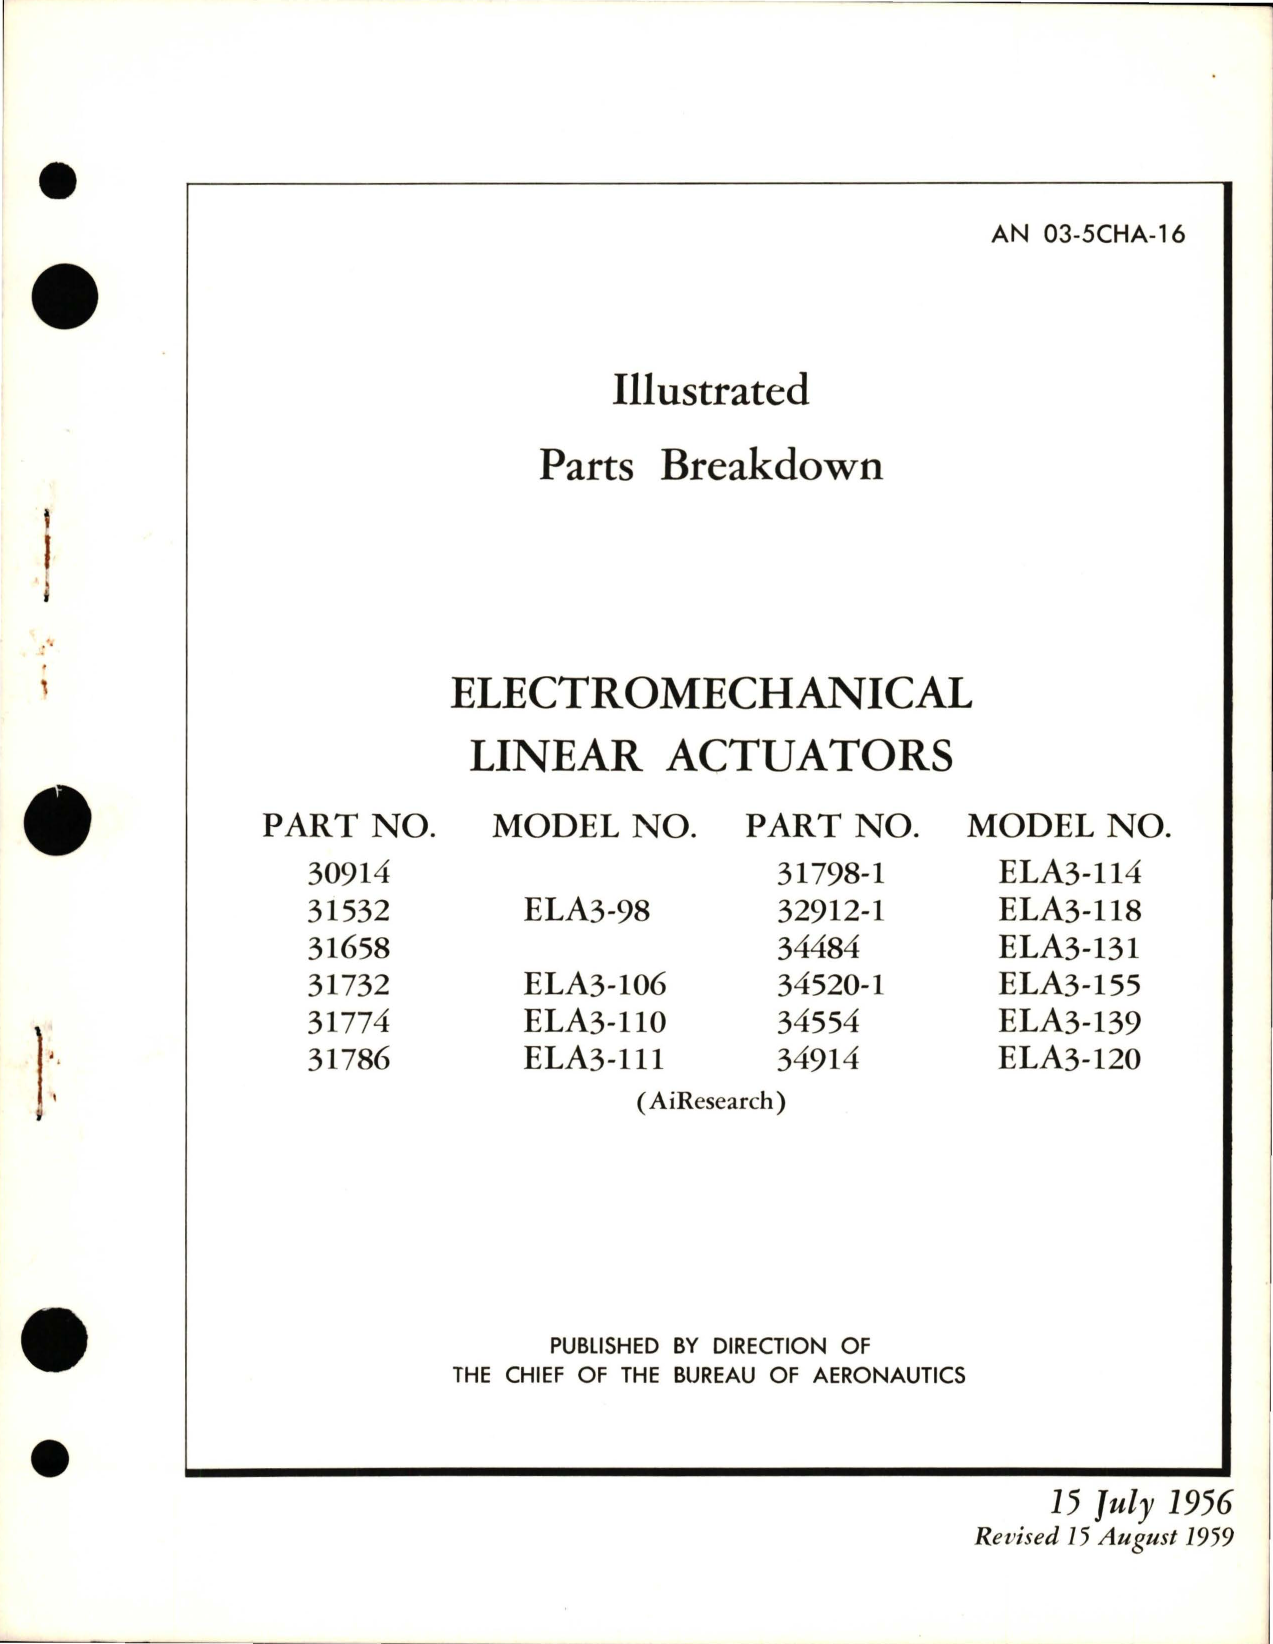 Sample page 1 from AirCorps Library document: Illustrated Parts Breakdown for Electromechanical Linear Actuators 